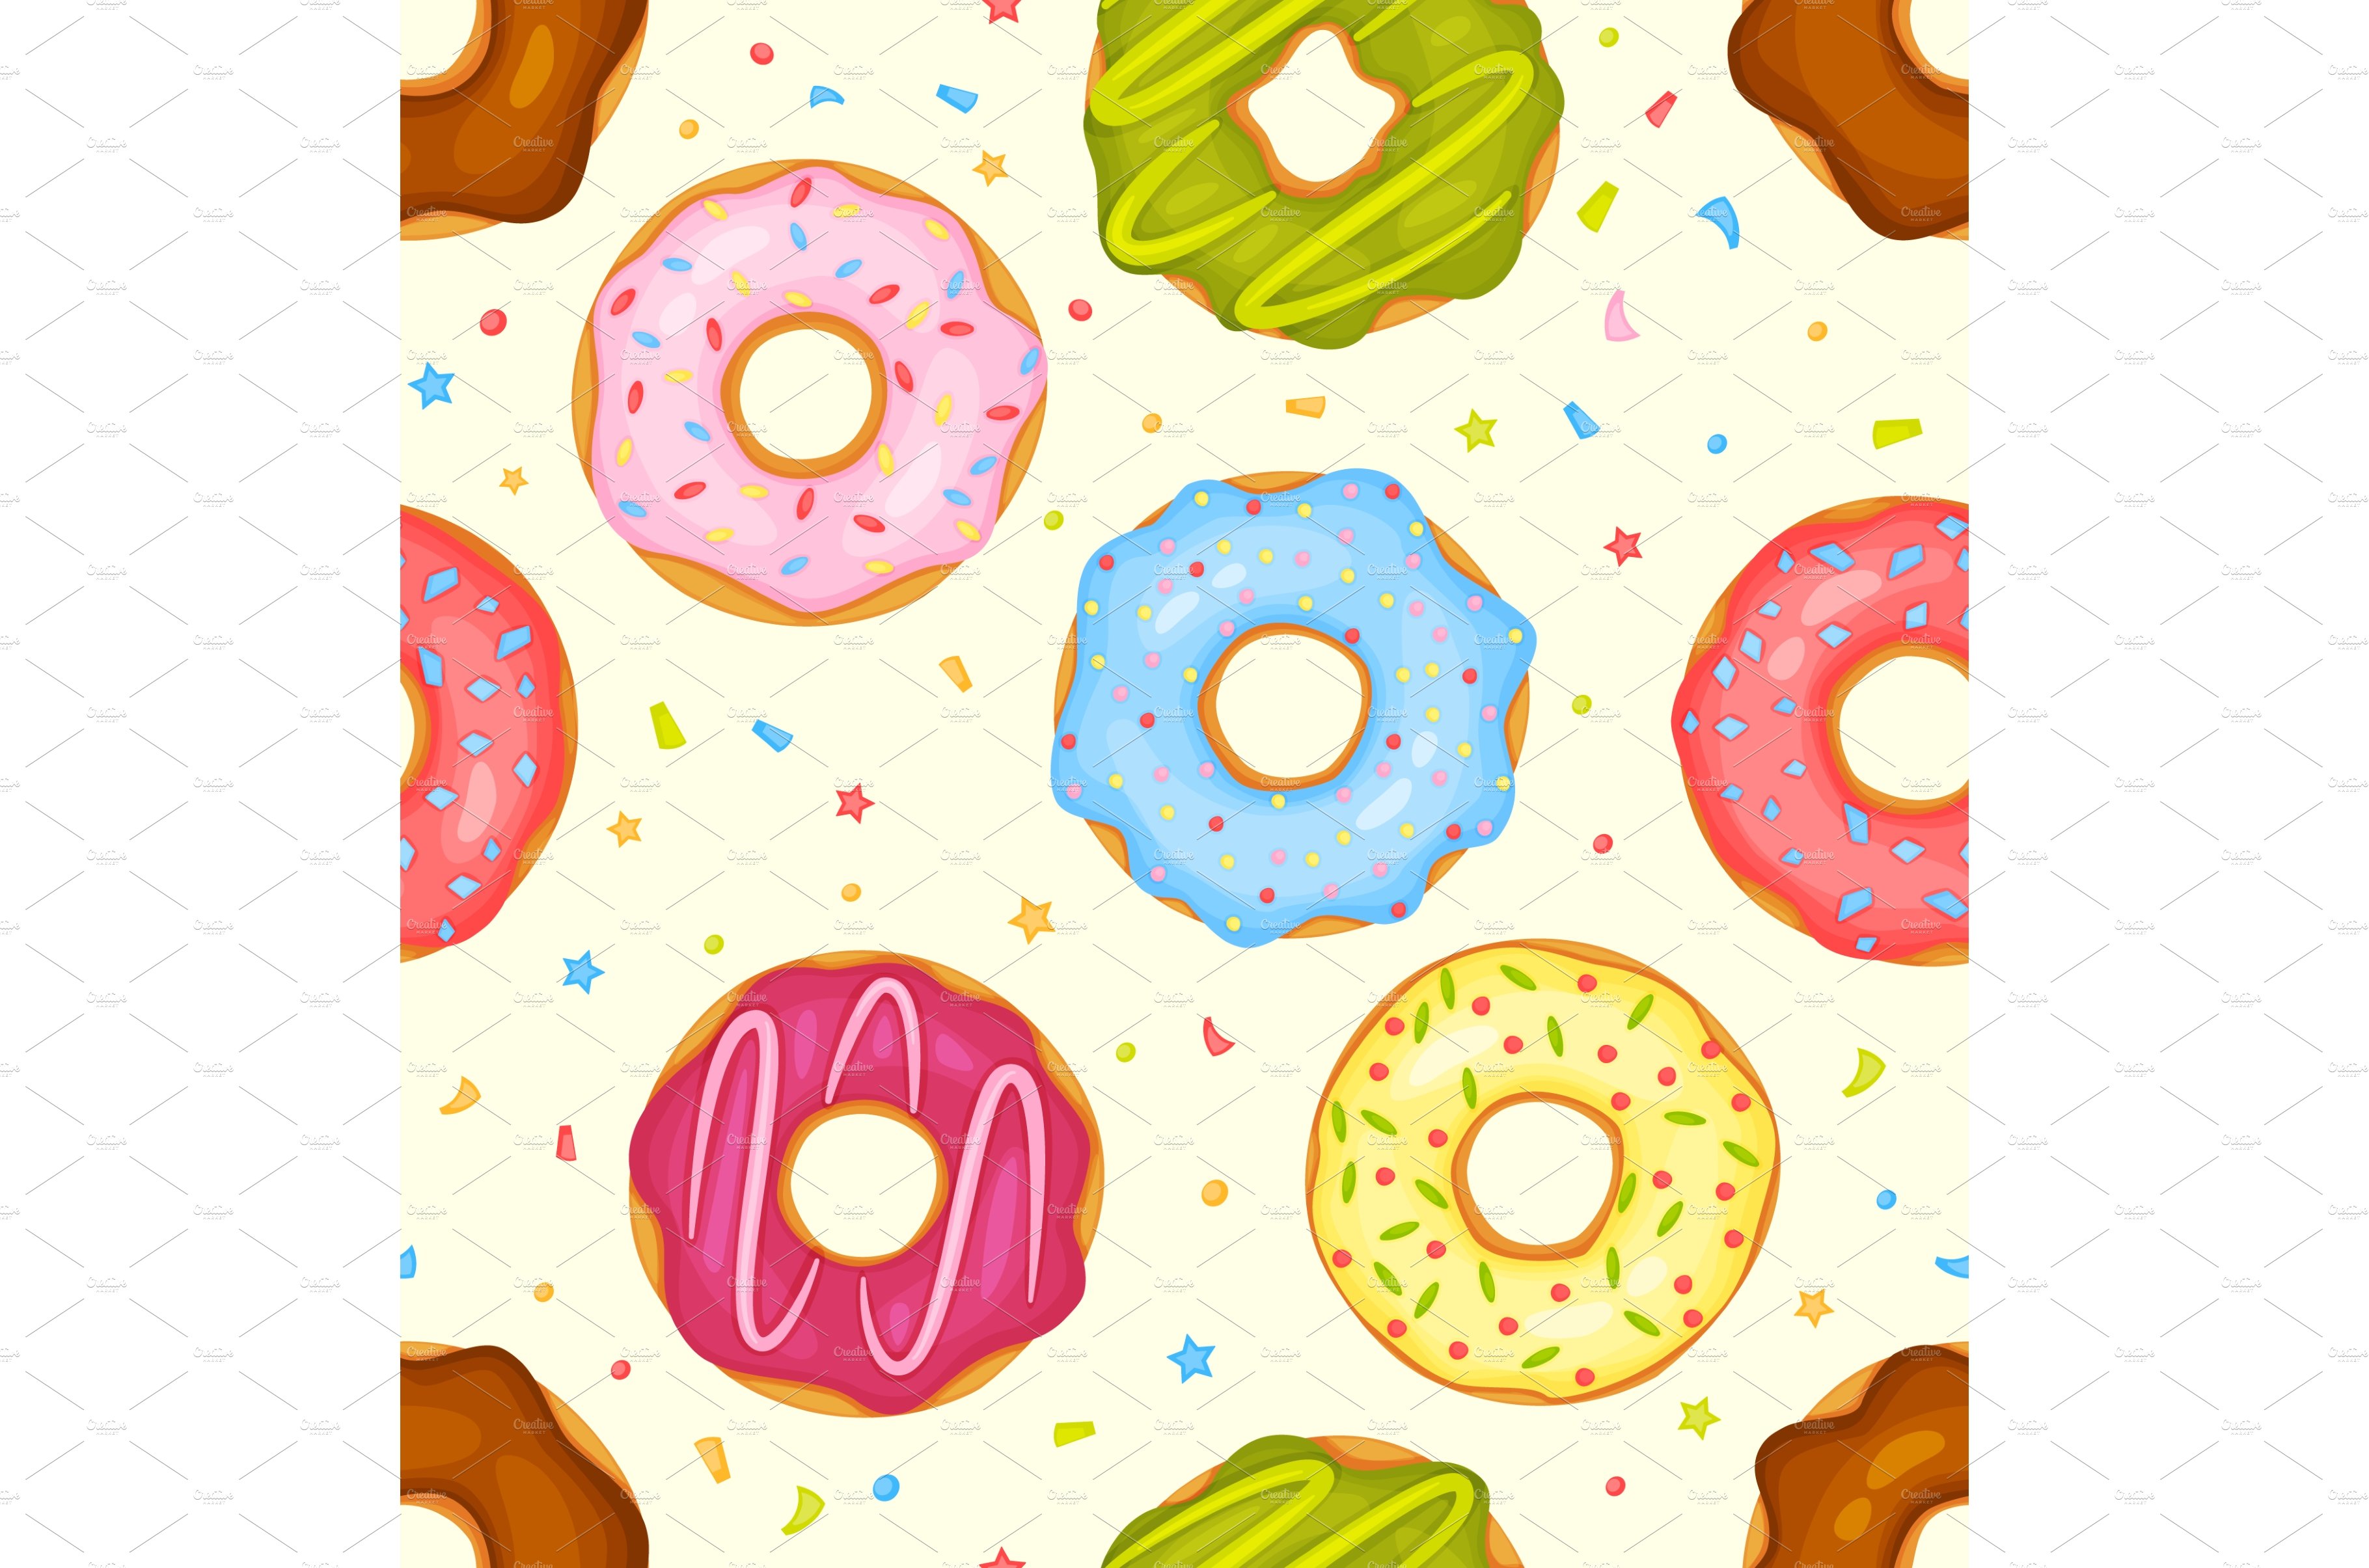 Cartoon cute donuts seamless pattern cover image.